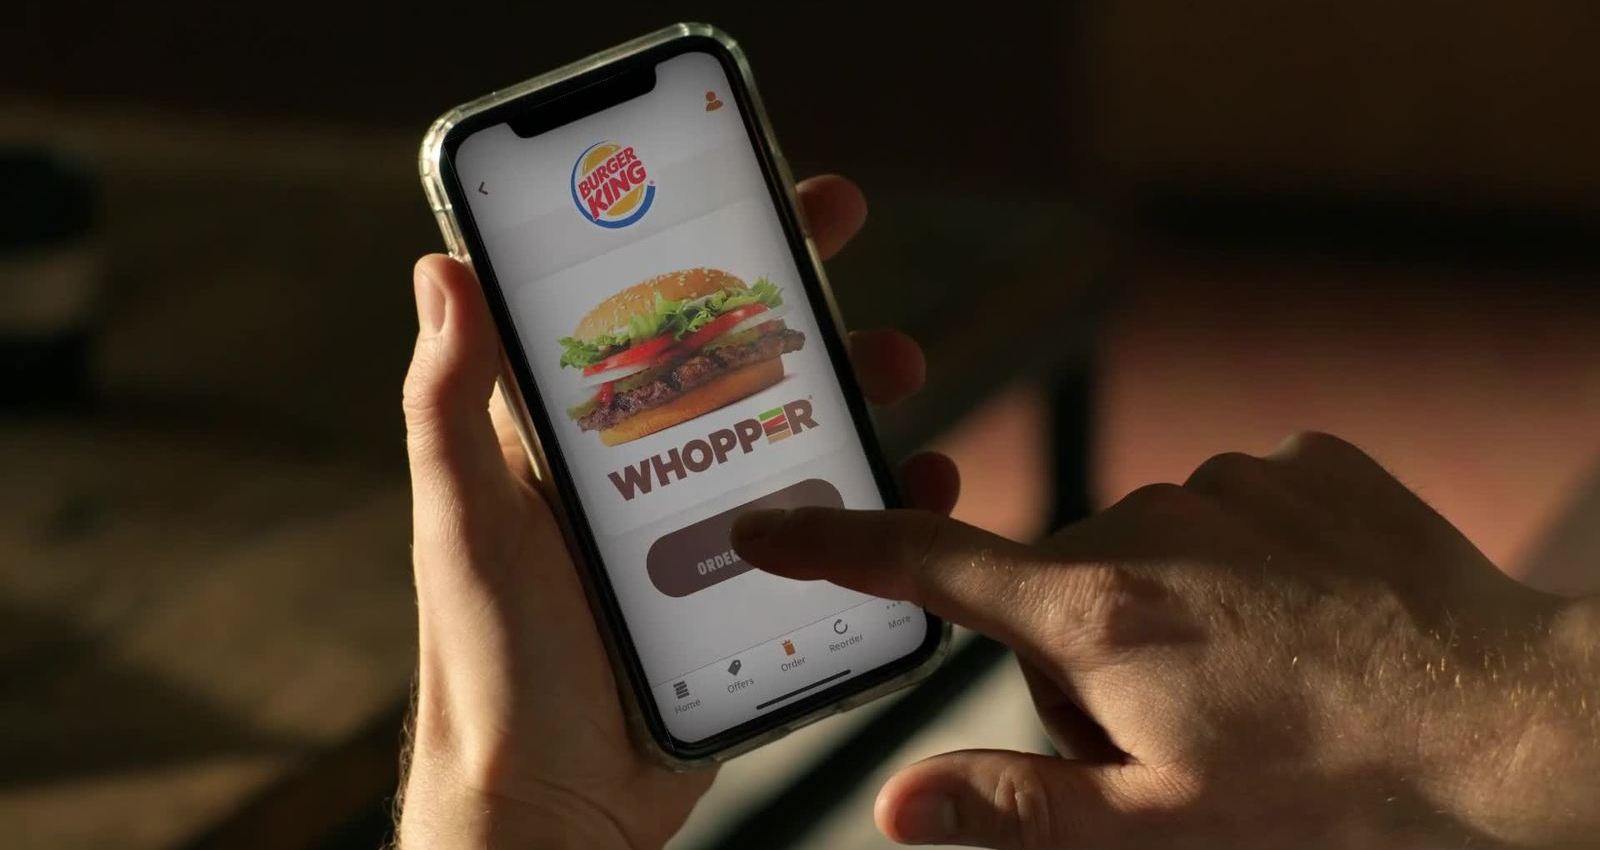 Stay Home of the Whopper